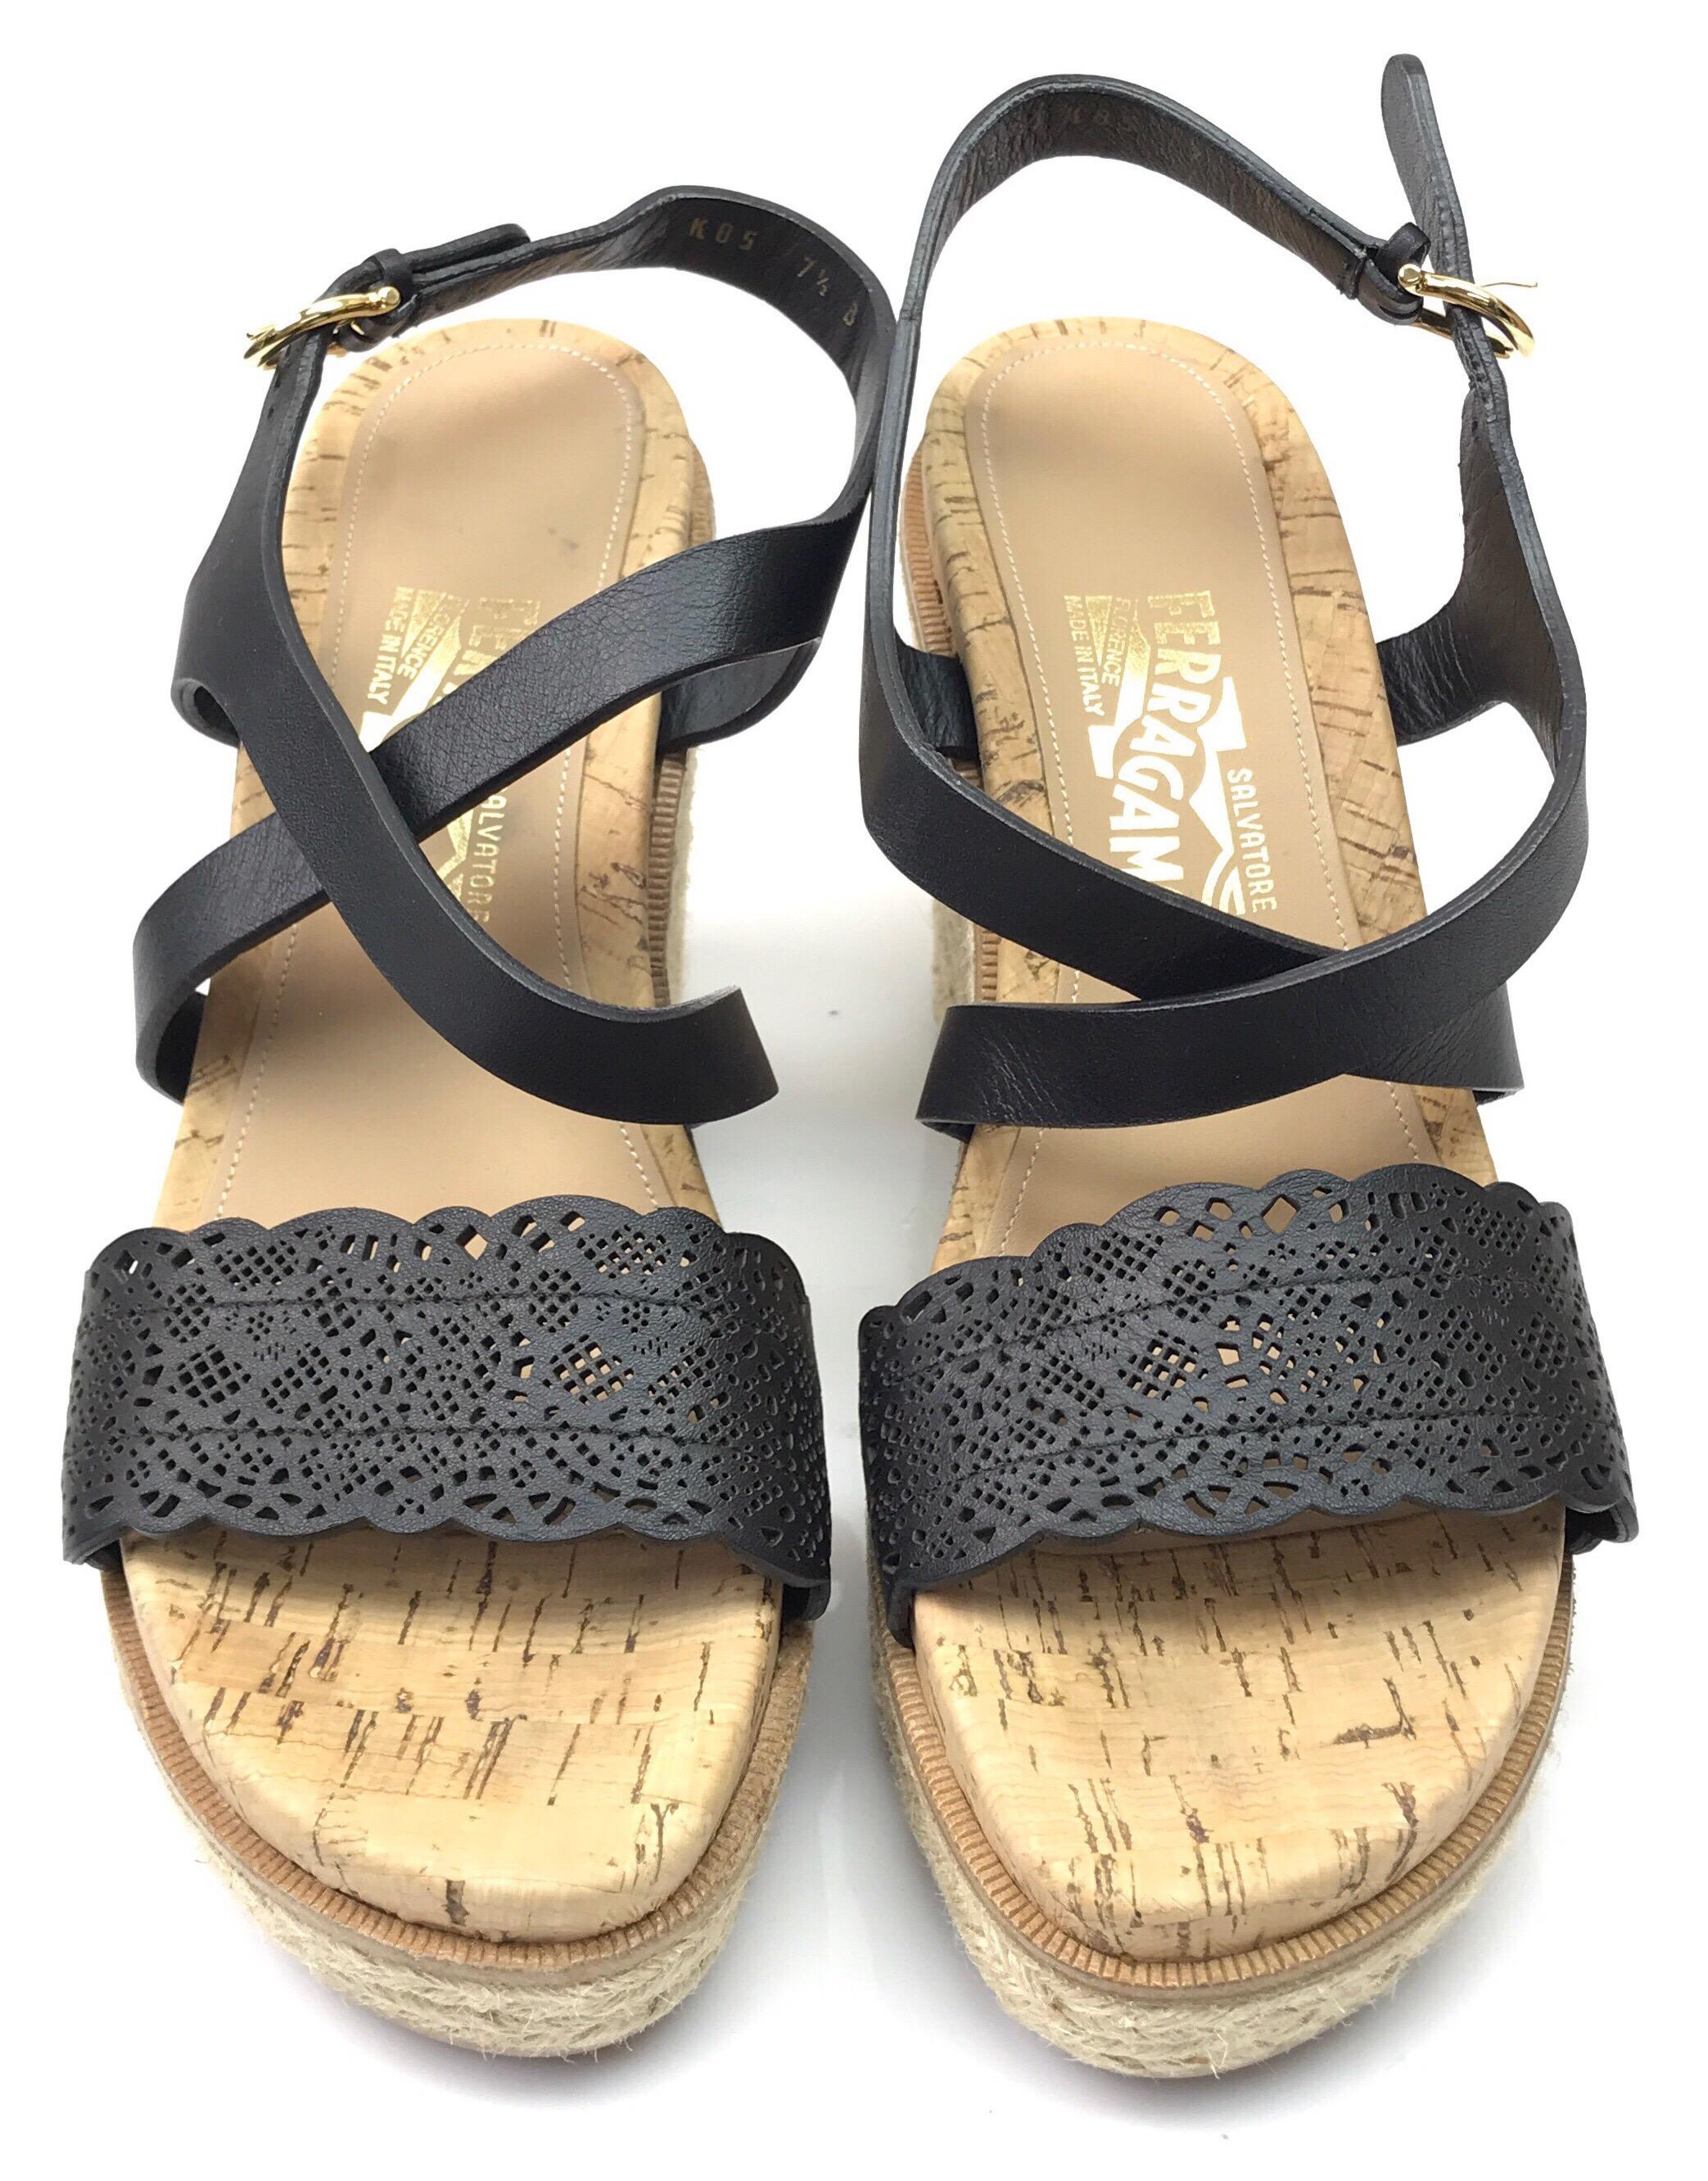 Salvatore Ferragamo Wedges with Black straps-7.5. These adorable Salvatore Ferragamo wedges are in excellent condition. They show barely any sign of use. They are made of a tan corkscrew material on the sole and have black straps. There is a gold